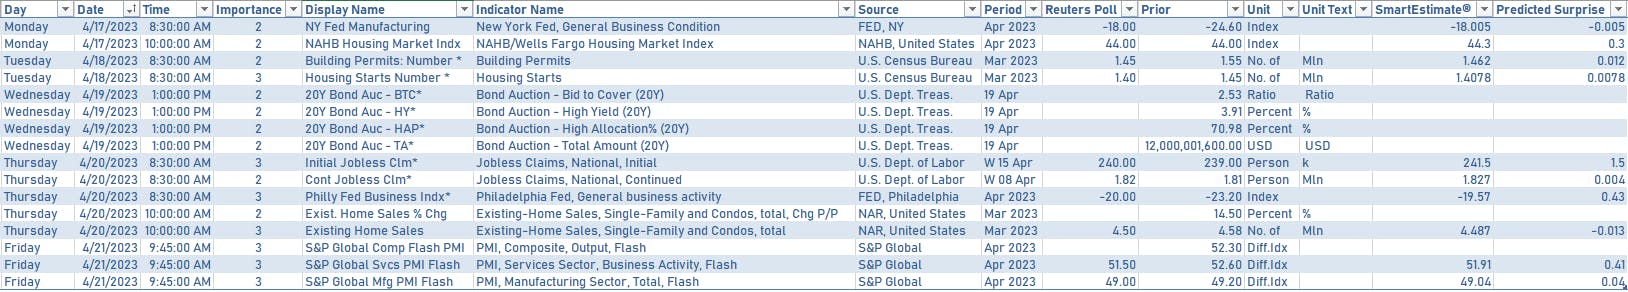 US Economic data in the week ahead | Sources: phipost.com, Refinitiv data